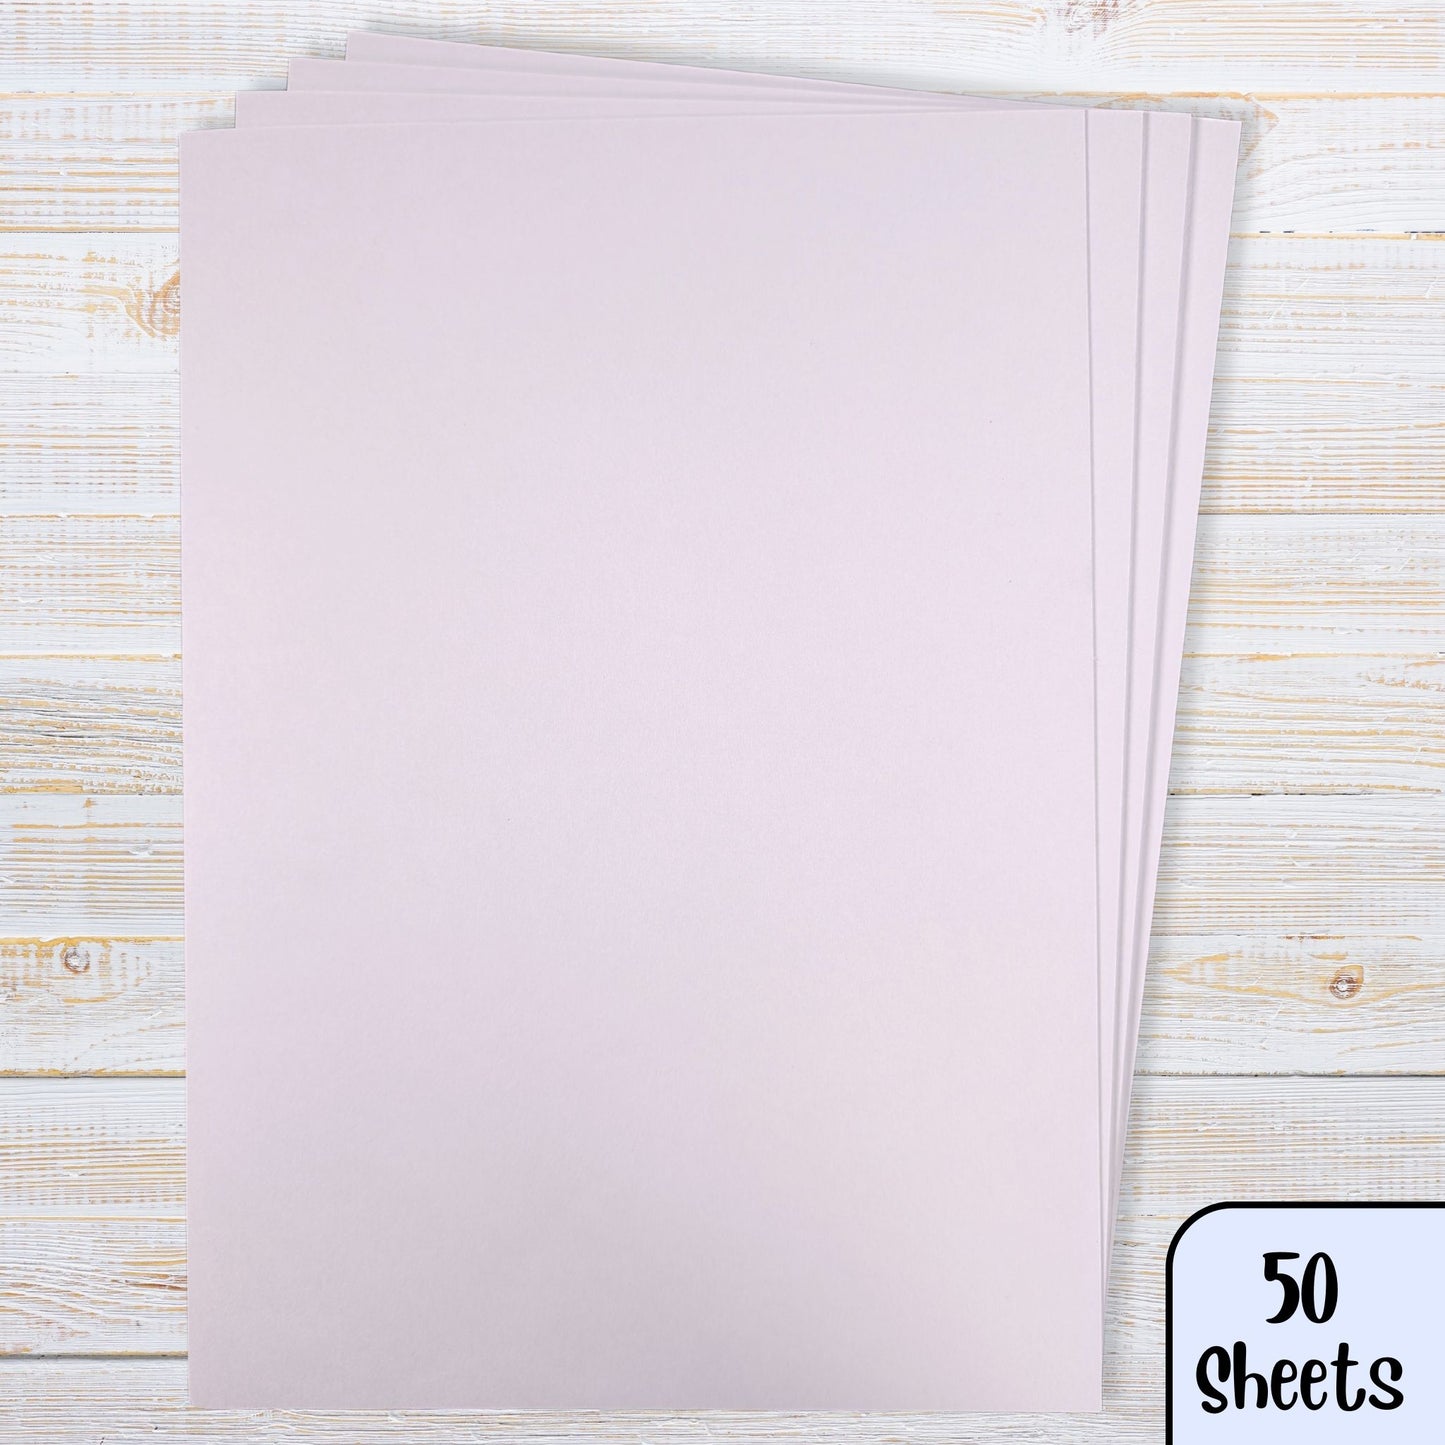 A3 Antique Card 165gsm Sheets for Drawing, Painting, Printing, Arts & Crafts.